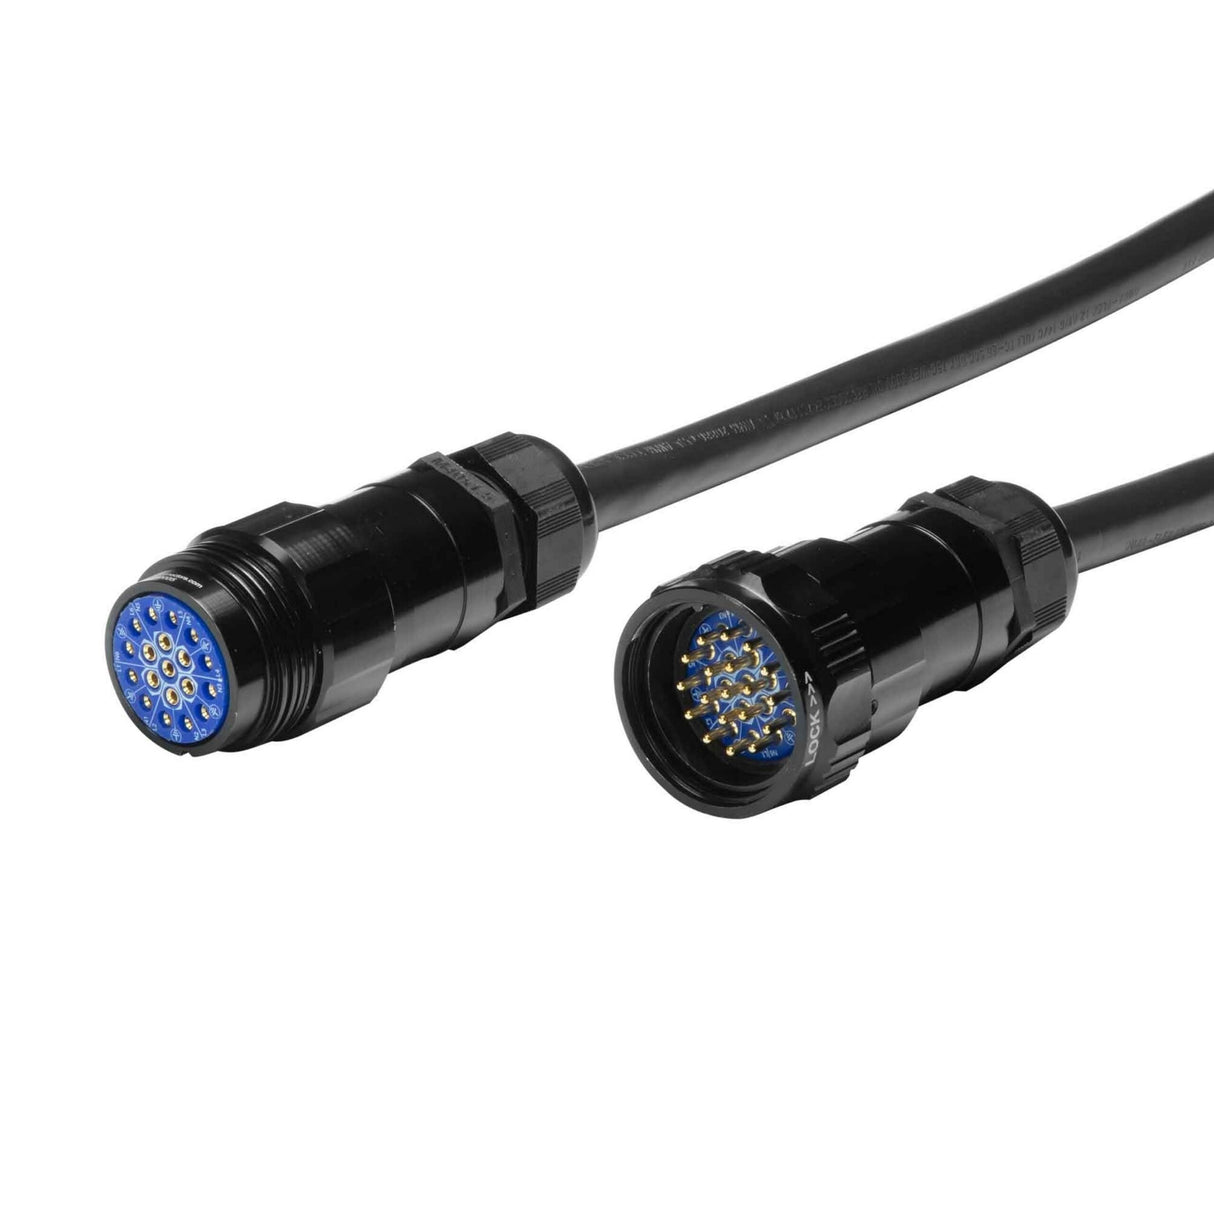 Elite Core SOCO-STD-MF-300 19-Pin Soco Extension Lighting Power Cable, Male to Female 300-Foot with Standard Back Shell Phase 3 Connector